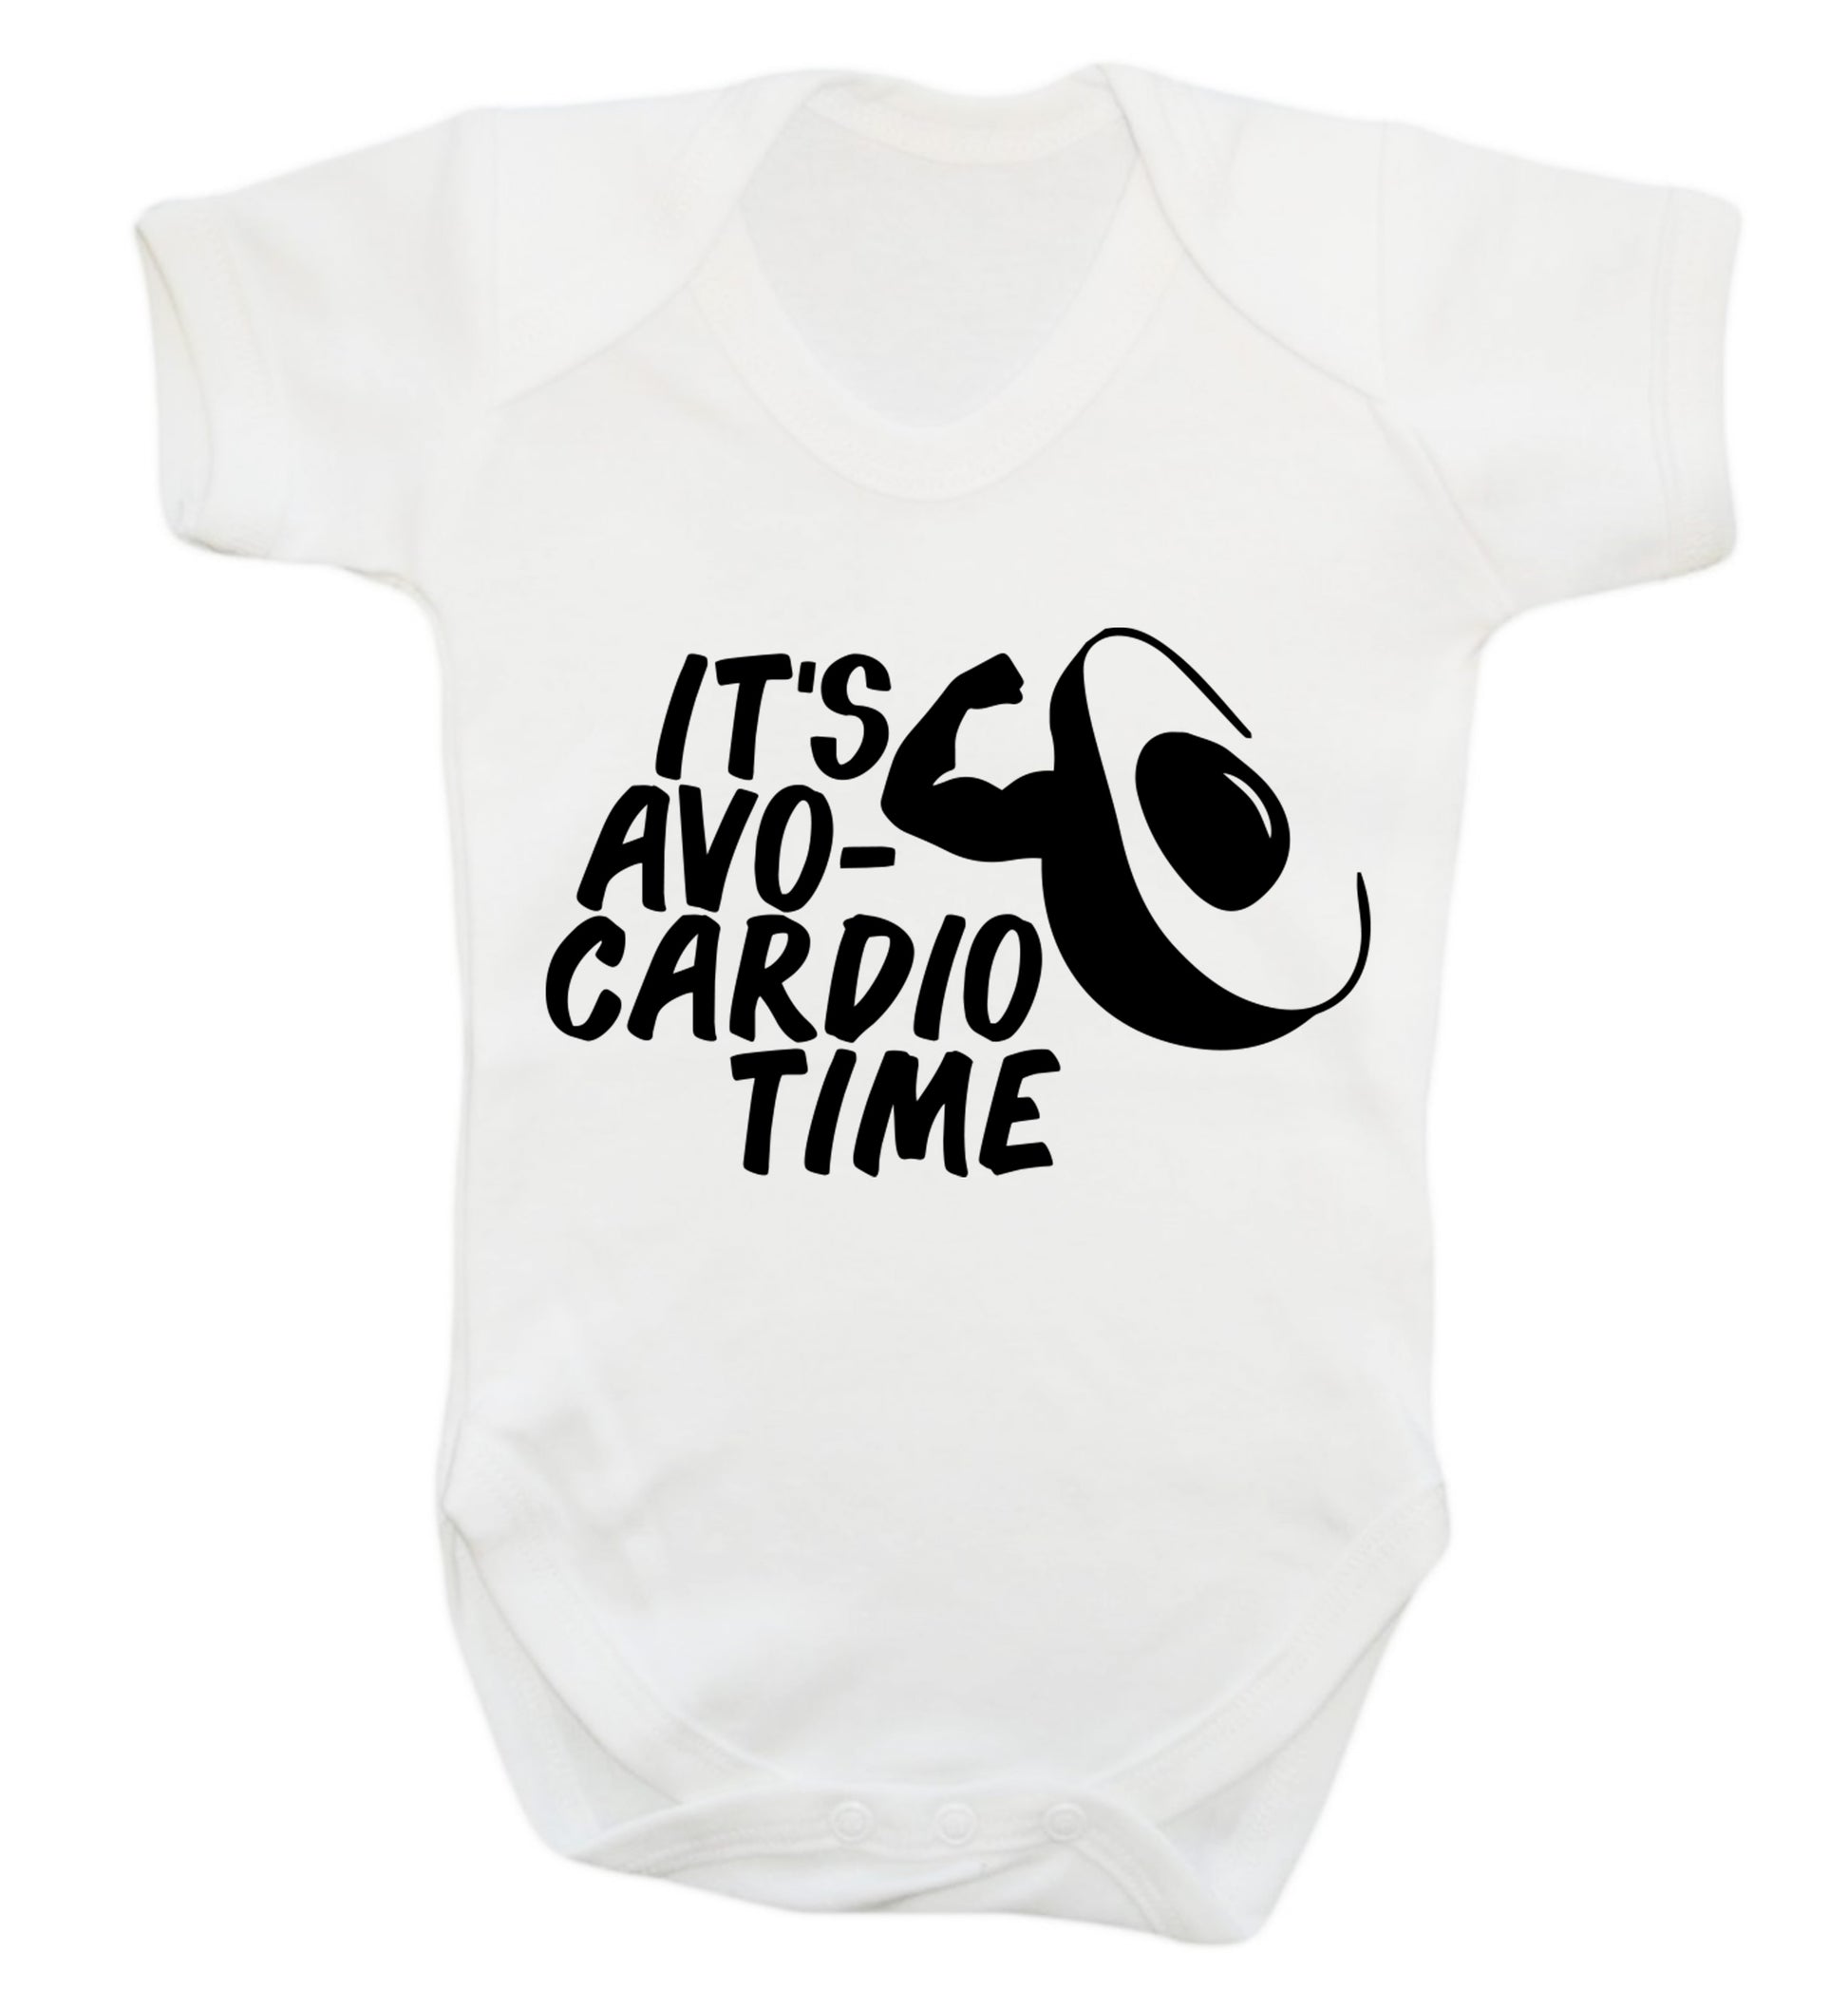 It's avo-cardio time Baby Vest white 18-24 months